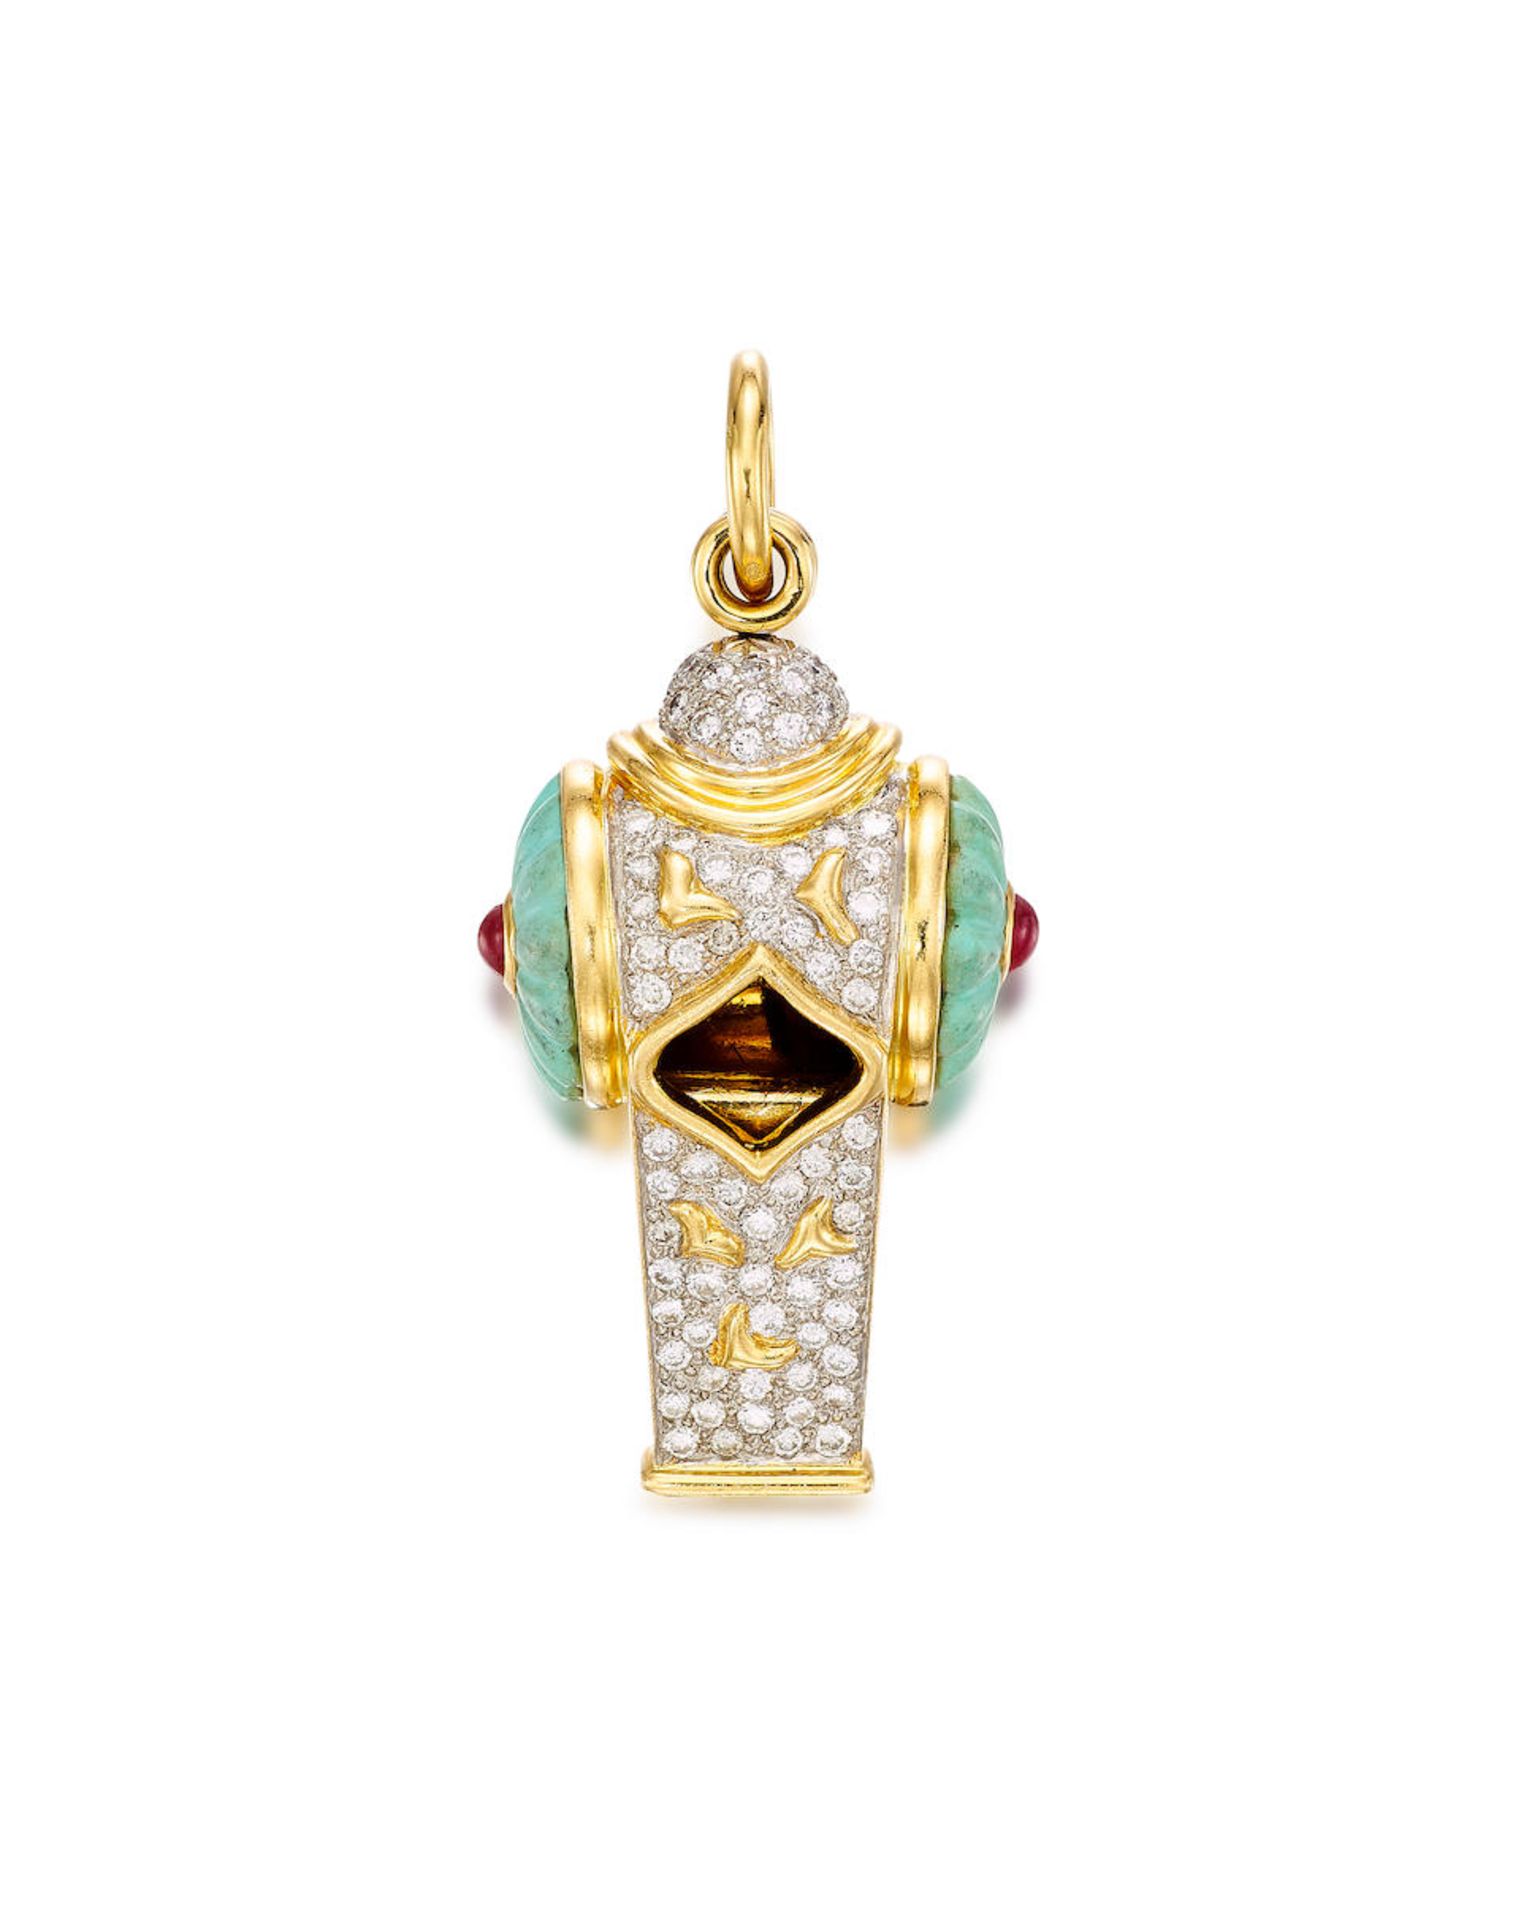 TURQUOISE, RUBY AND DIAMOND 'WHISTLE' PENDANT